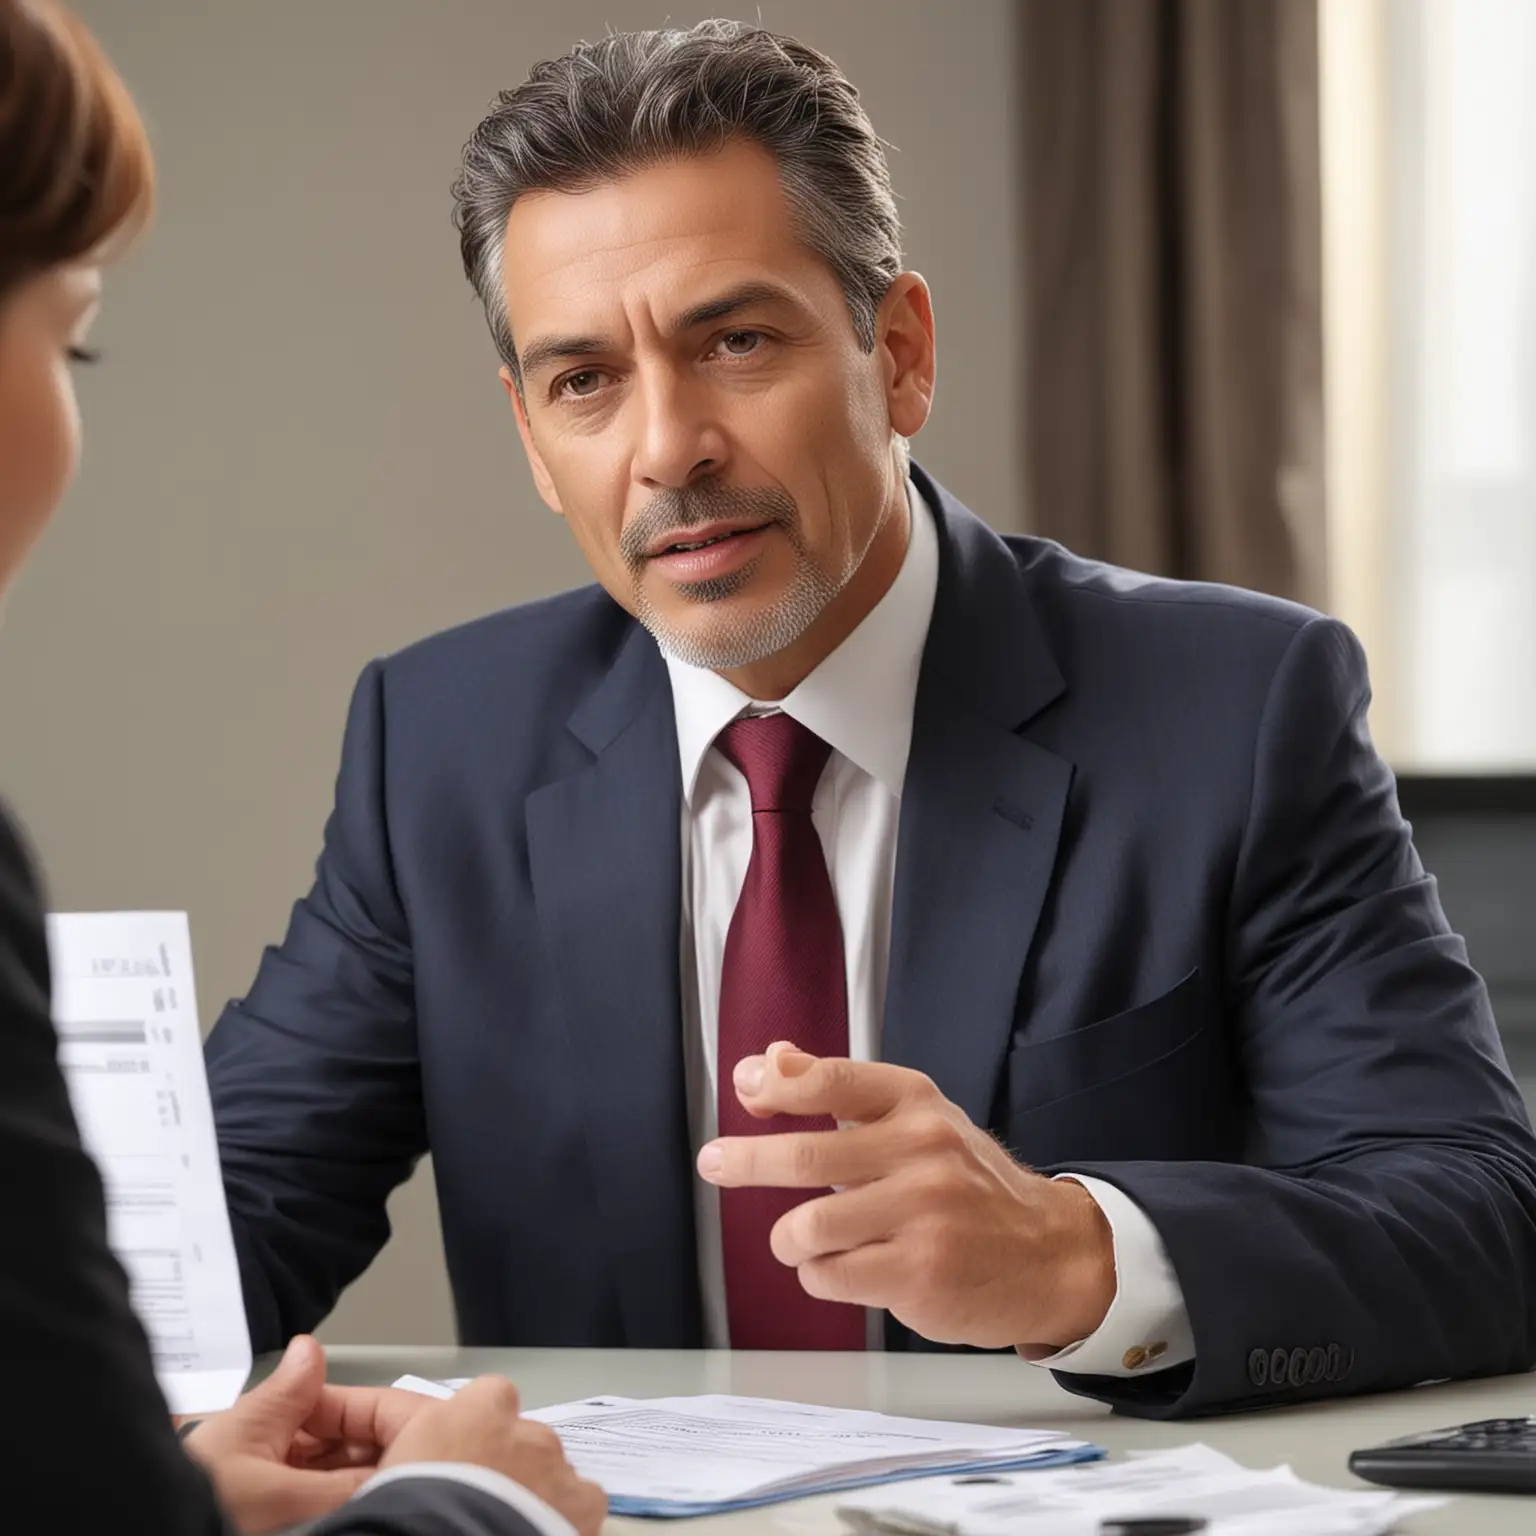 Experienced Businessman Opening Bank Account in Meeting